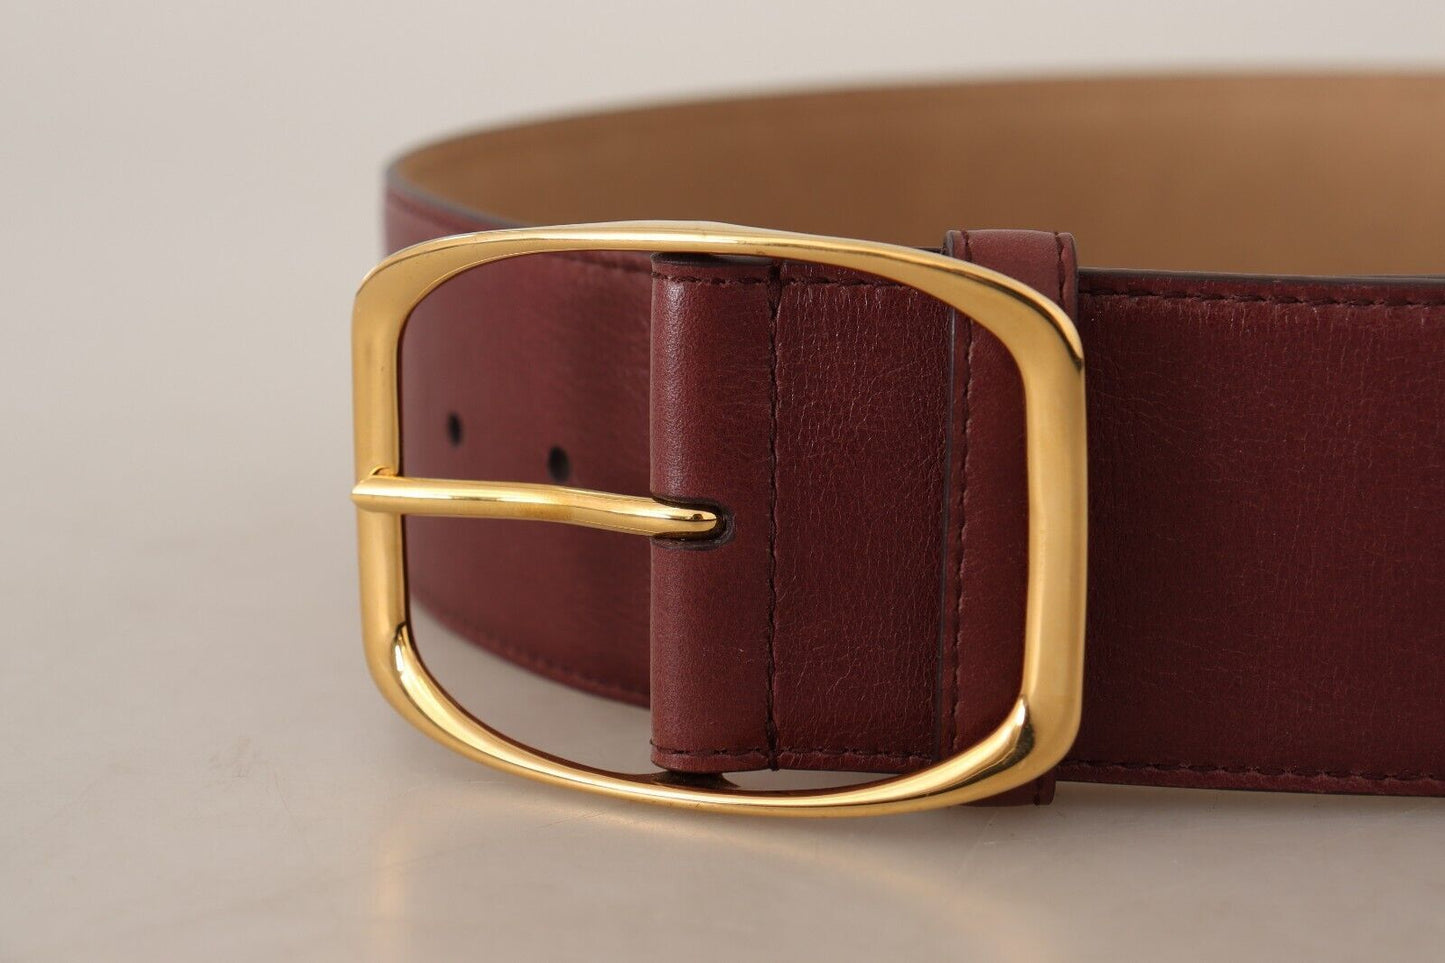 Dolce & Gabbana Maroon Leather Gold Metal Square Buckle Belt